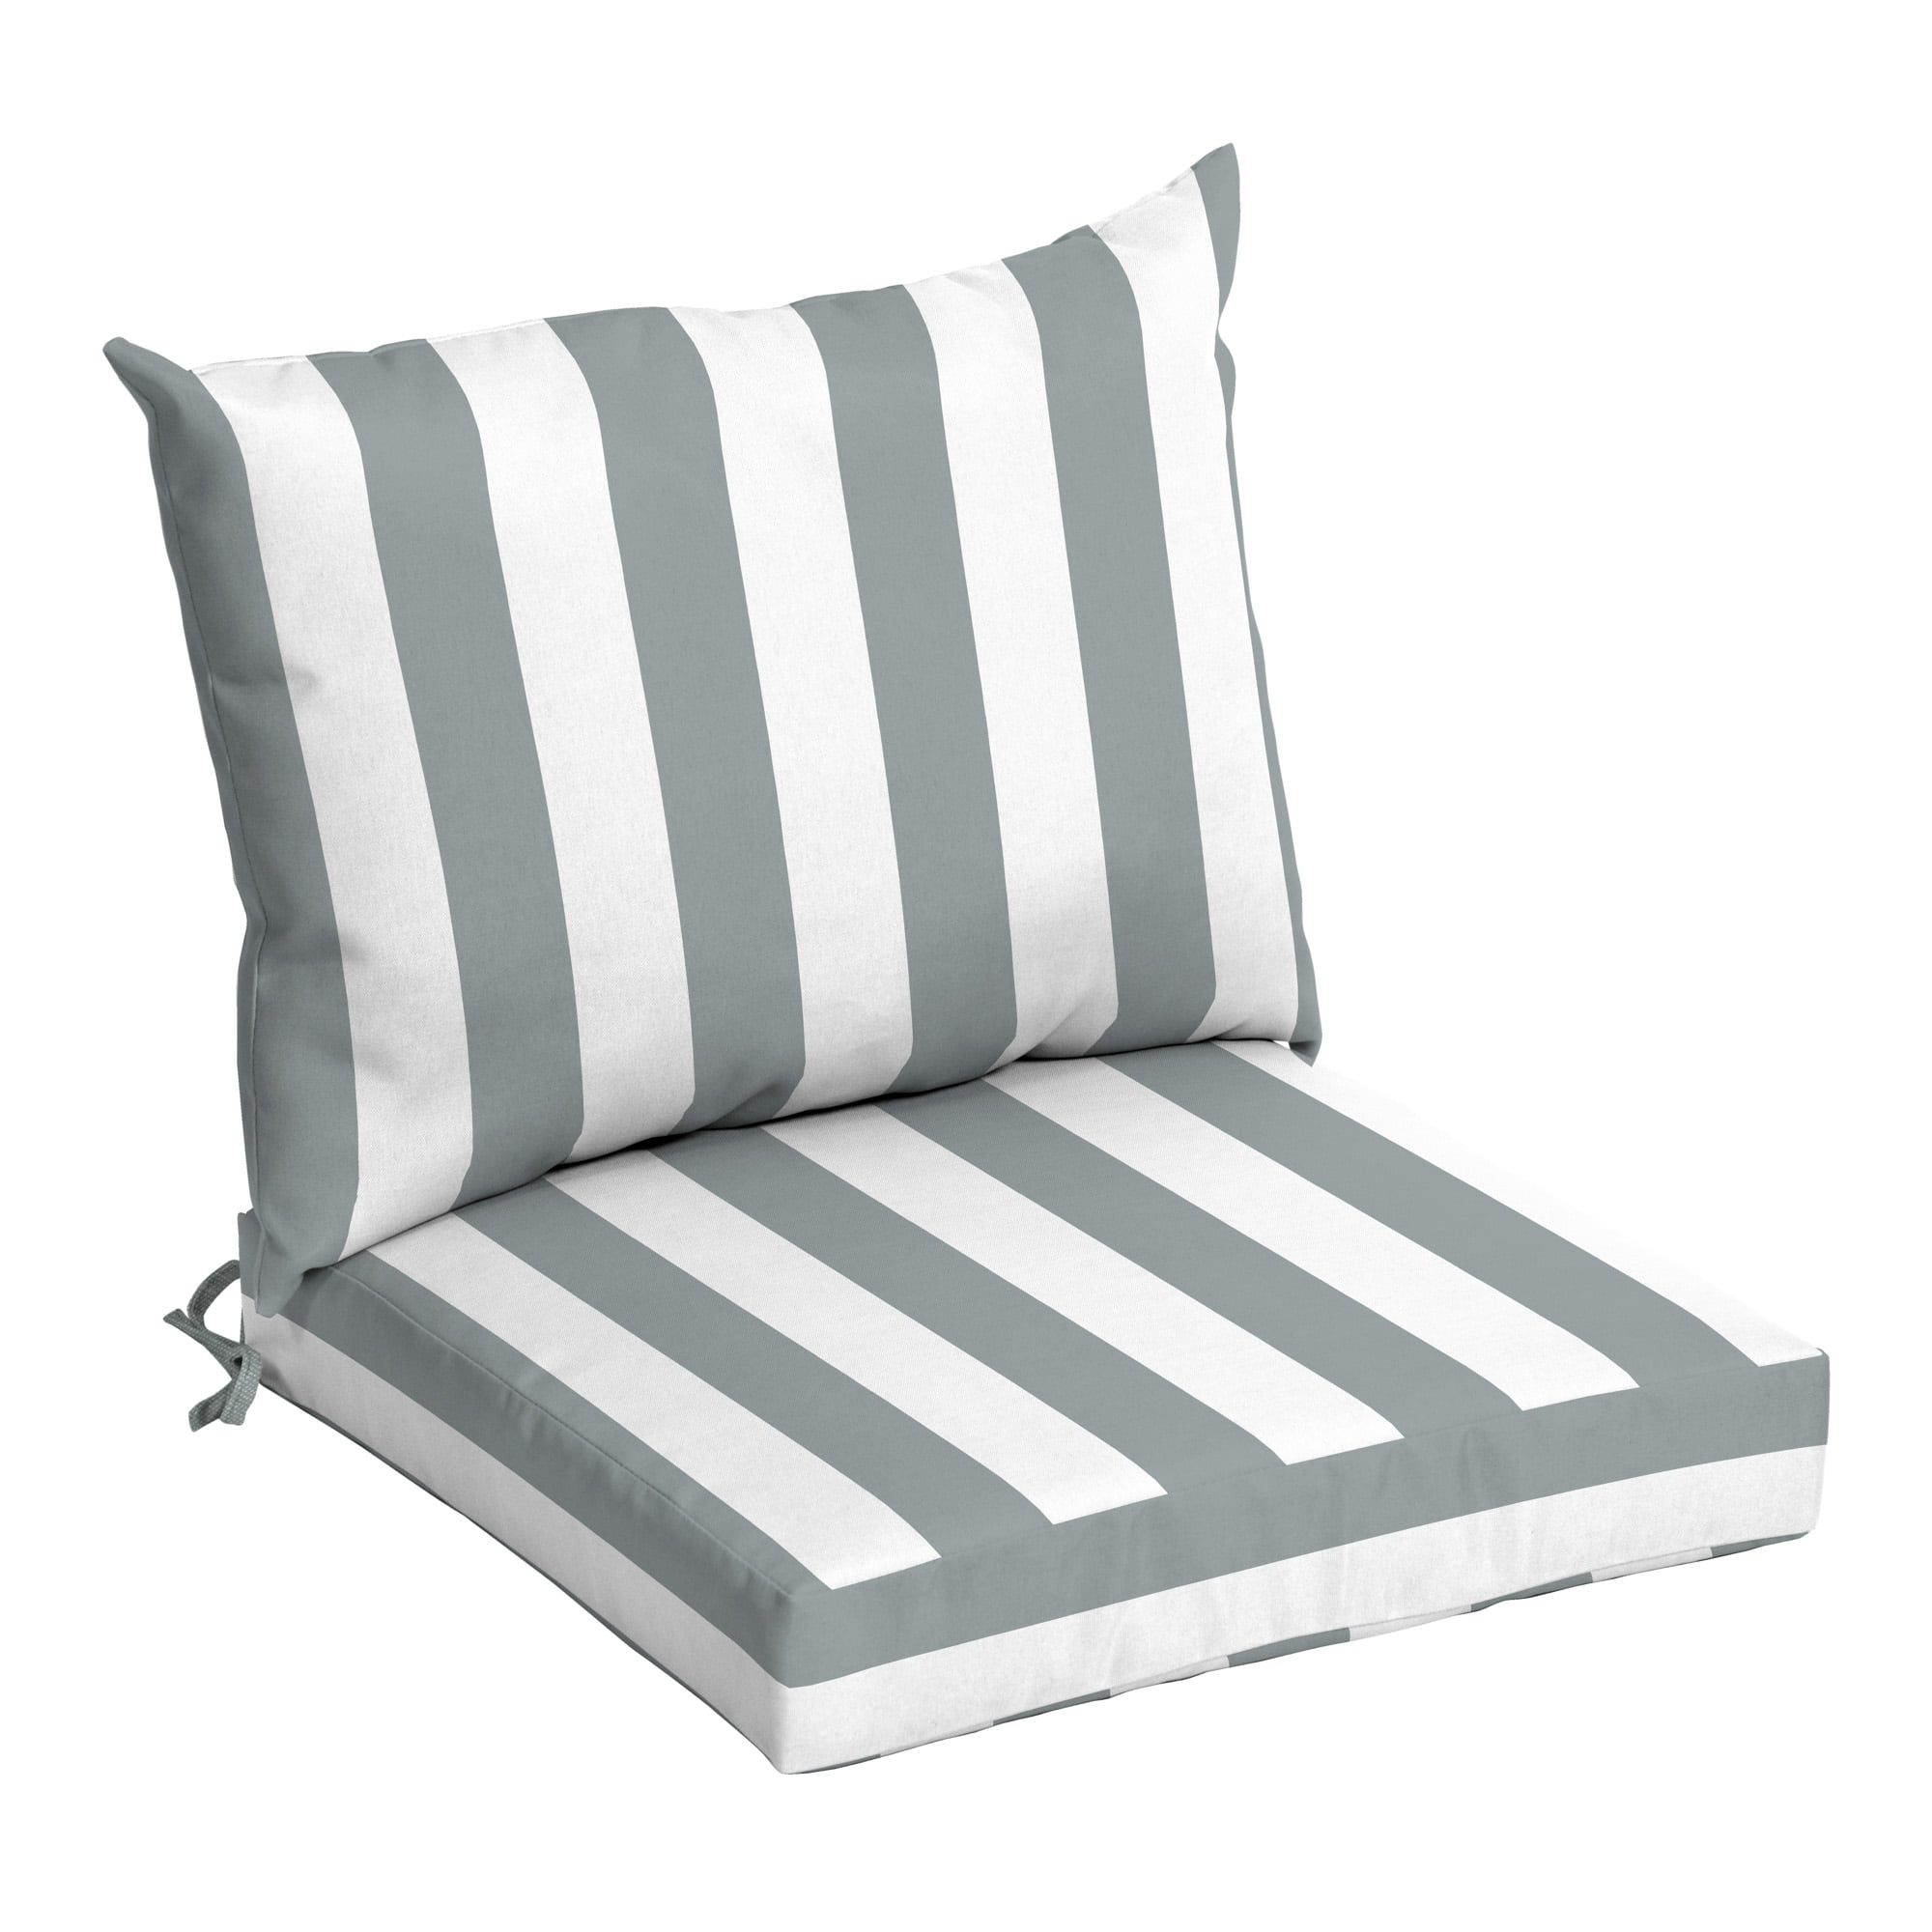 Arden Selections 38 X 21 Gray Striped, Black And White Striped Dining Chair Cushions